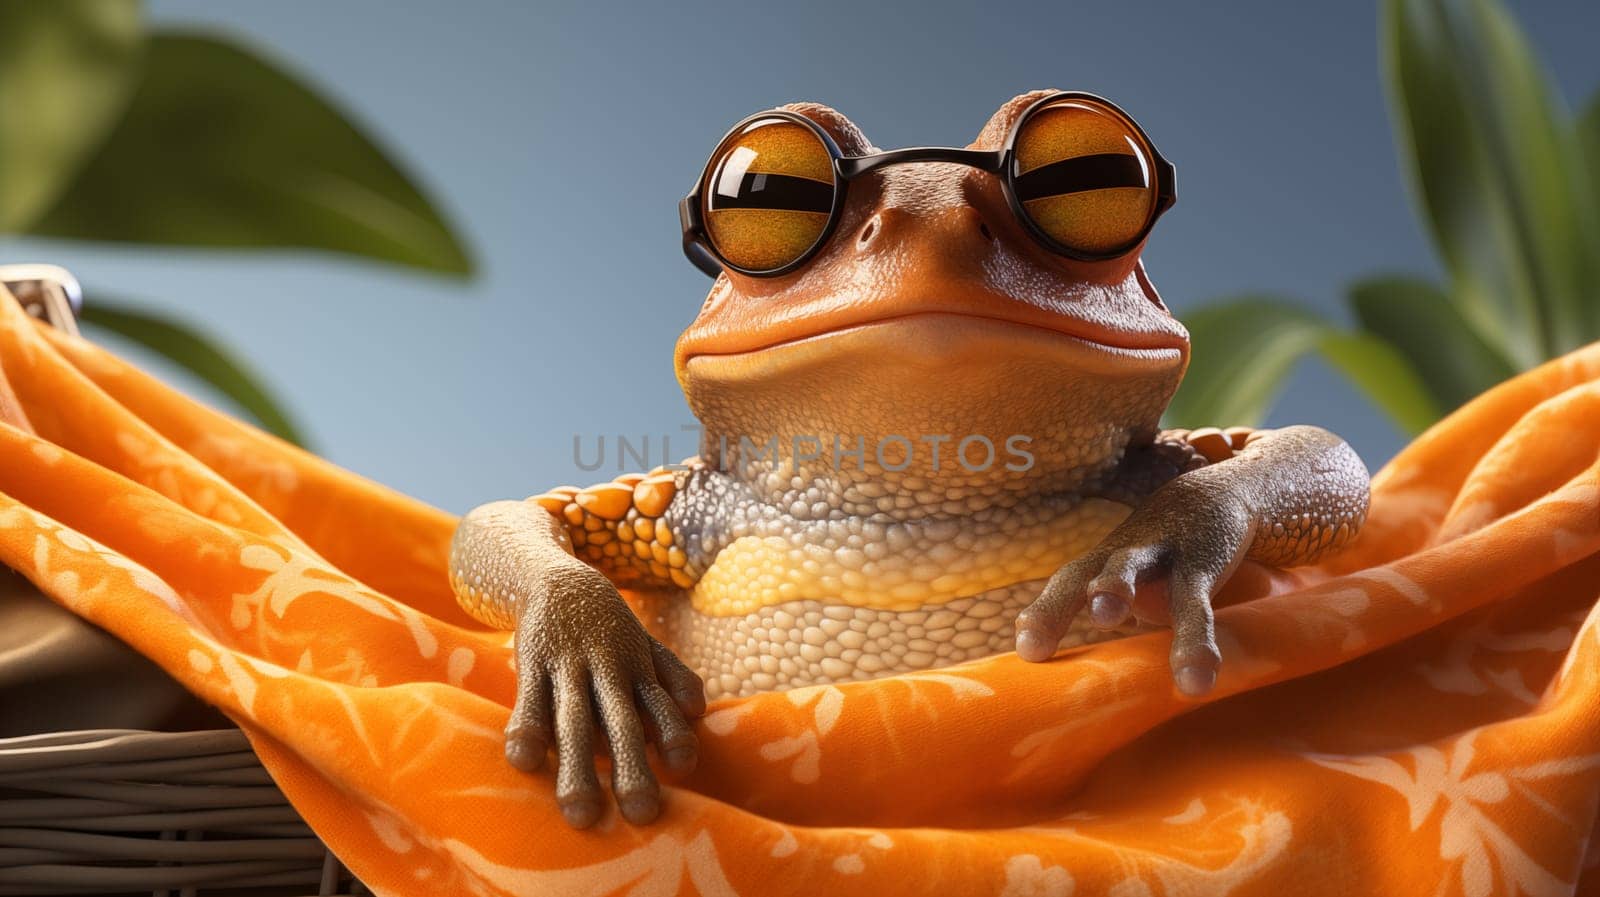 An engaging frog wearing sunglasses, casually lounging on an orange towel with a tropical backdrop.